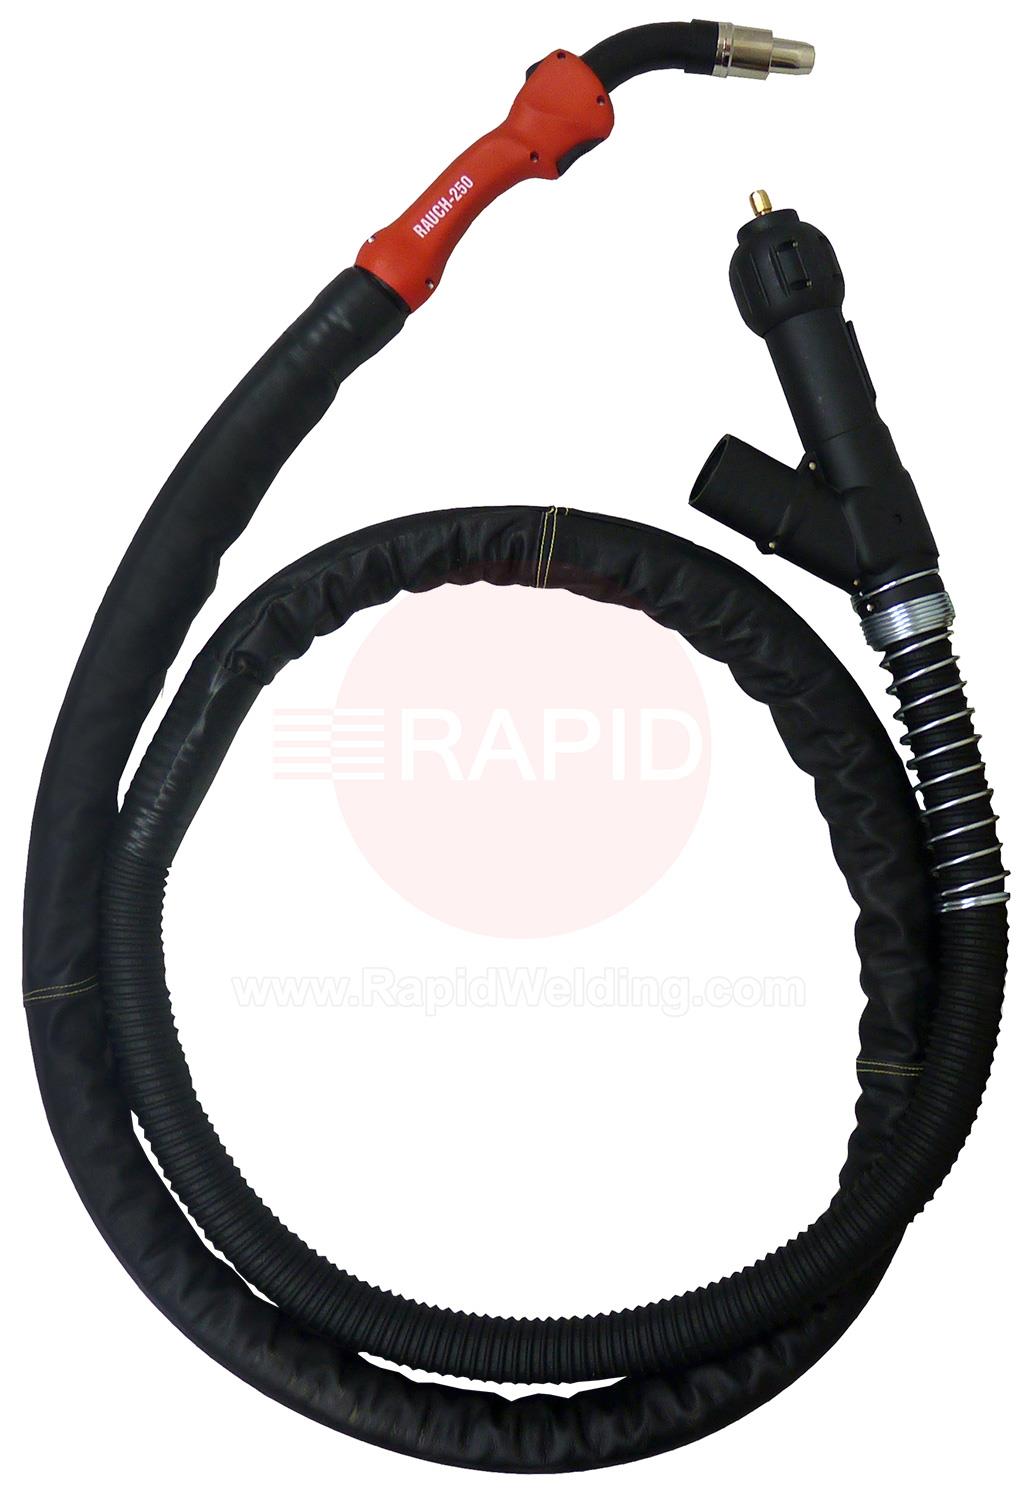 R2500411  MHS Smoke-250 Fume Extraction Air Cooled MIG Torch, 250A with Exhaust & Euro Connection - 4m